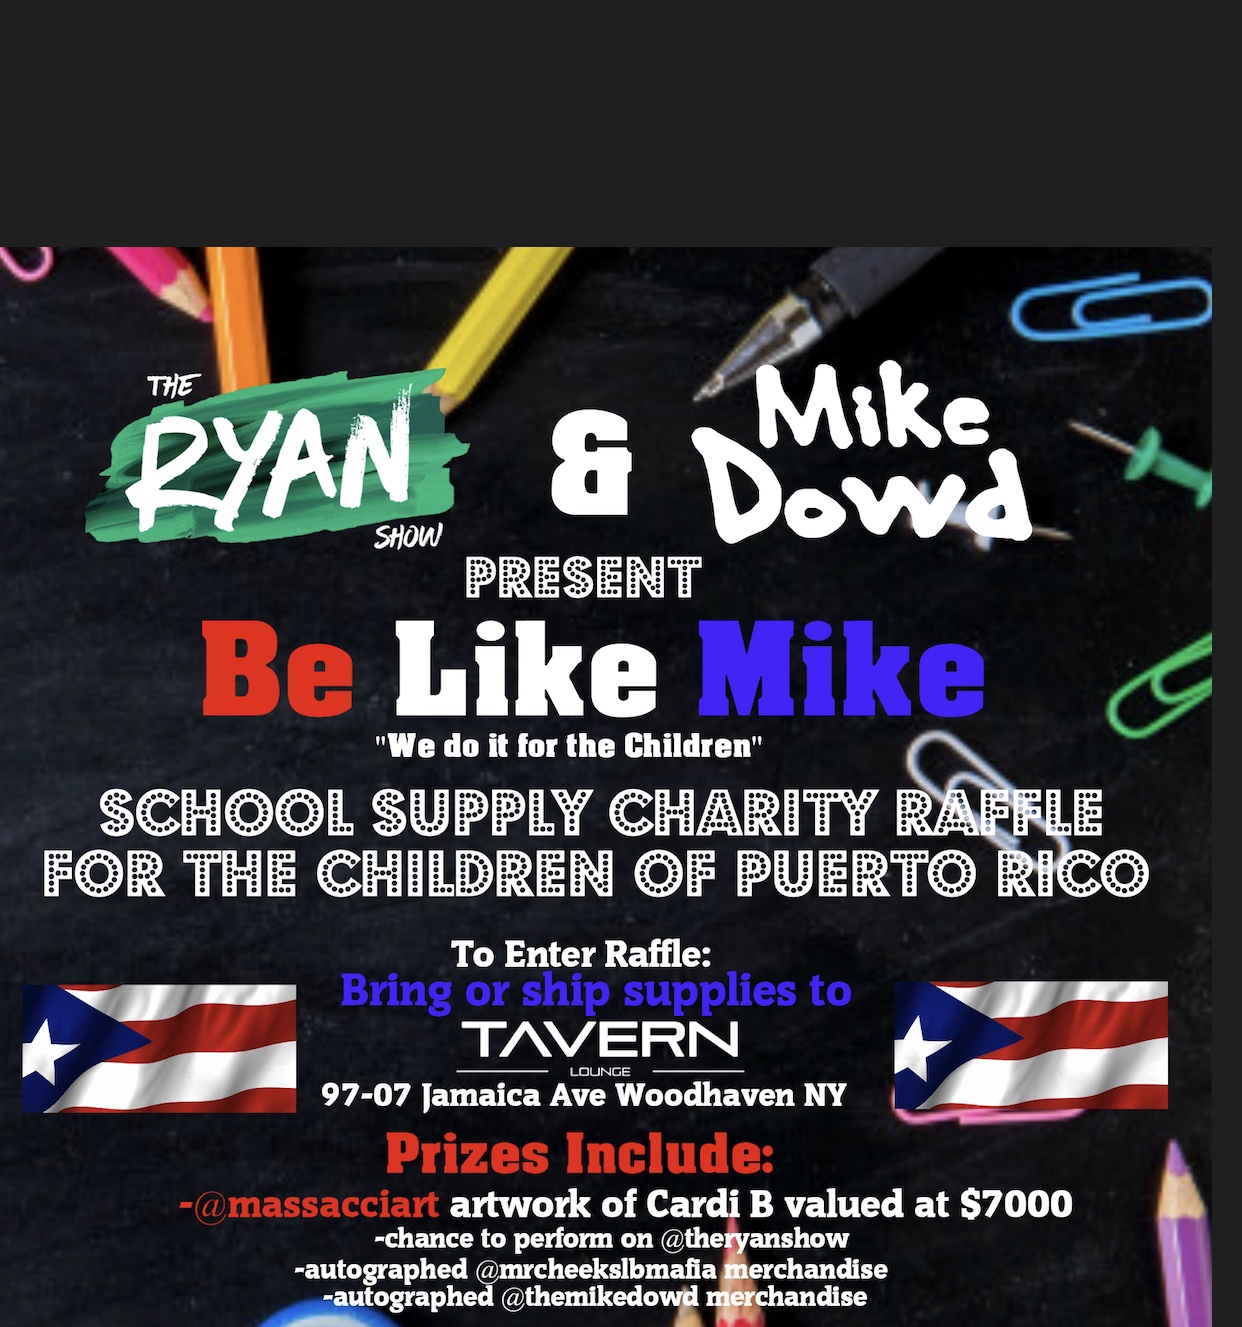 The Ryan Show x Mike Dowd Back-To-School Supply Drive